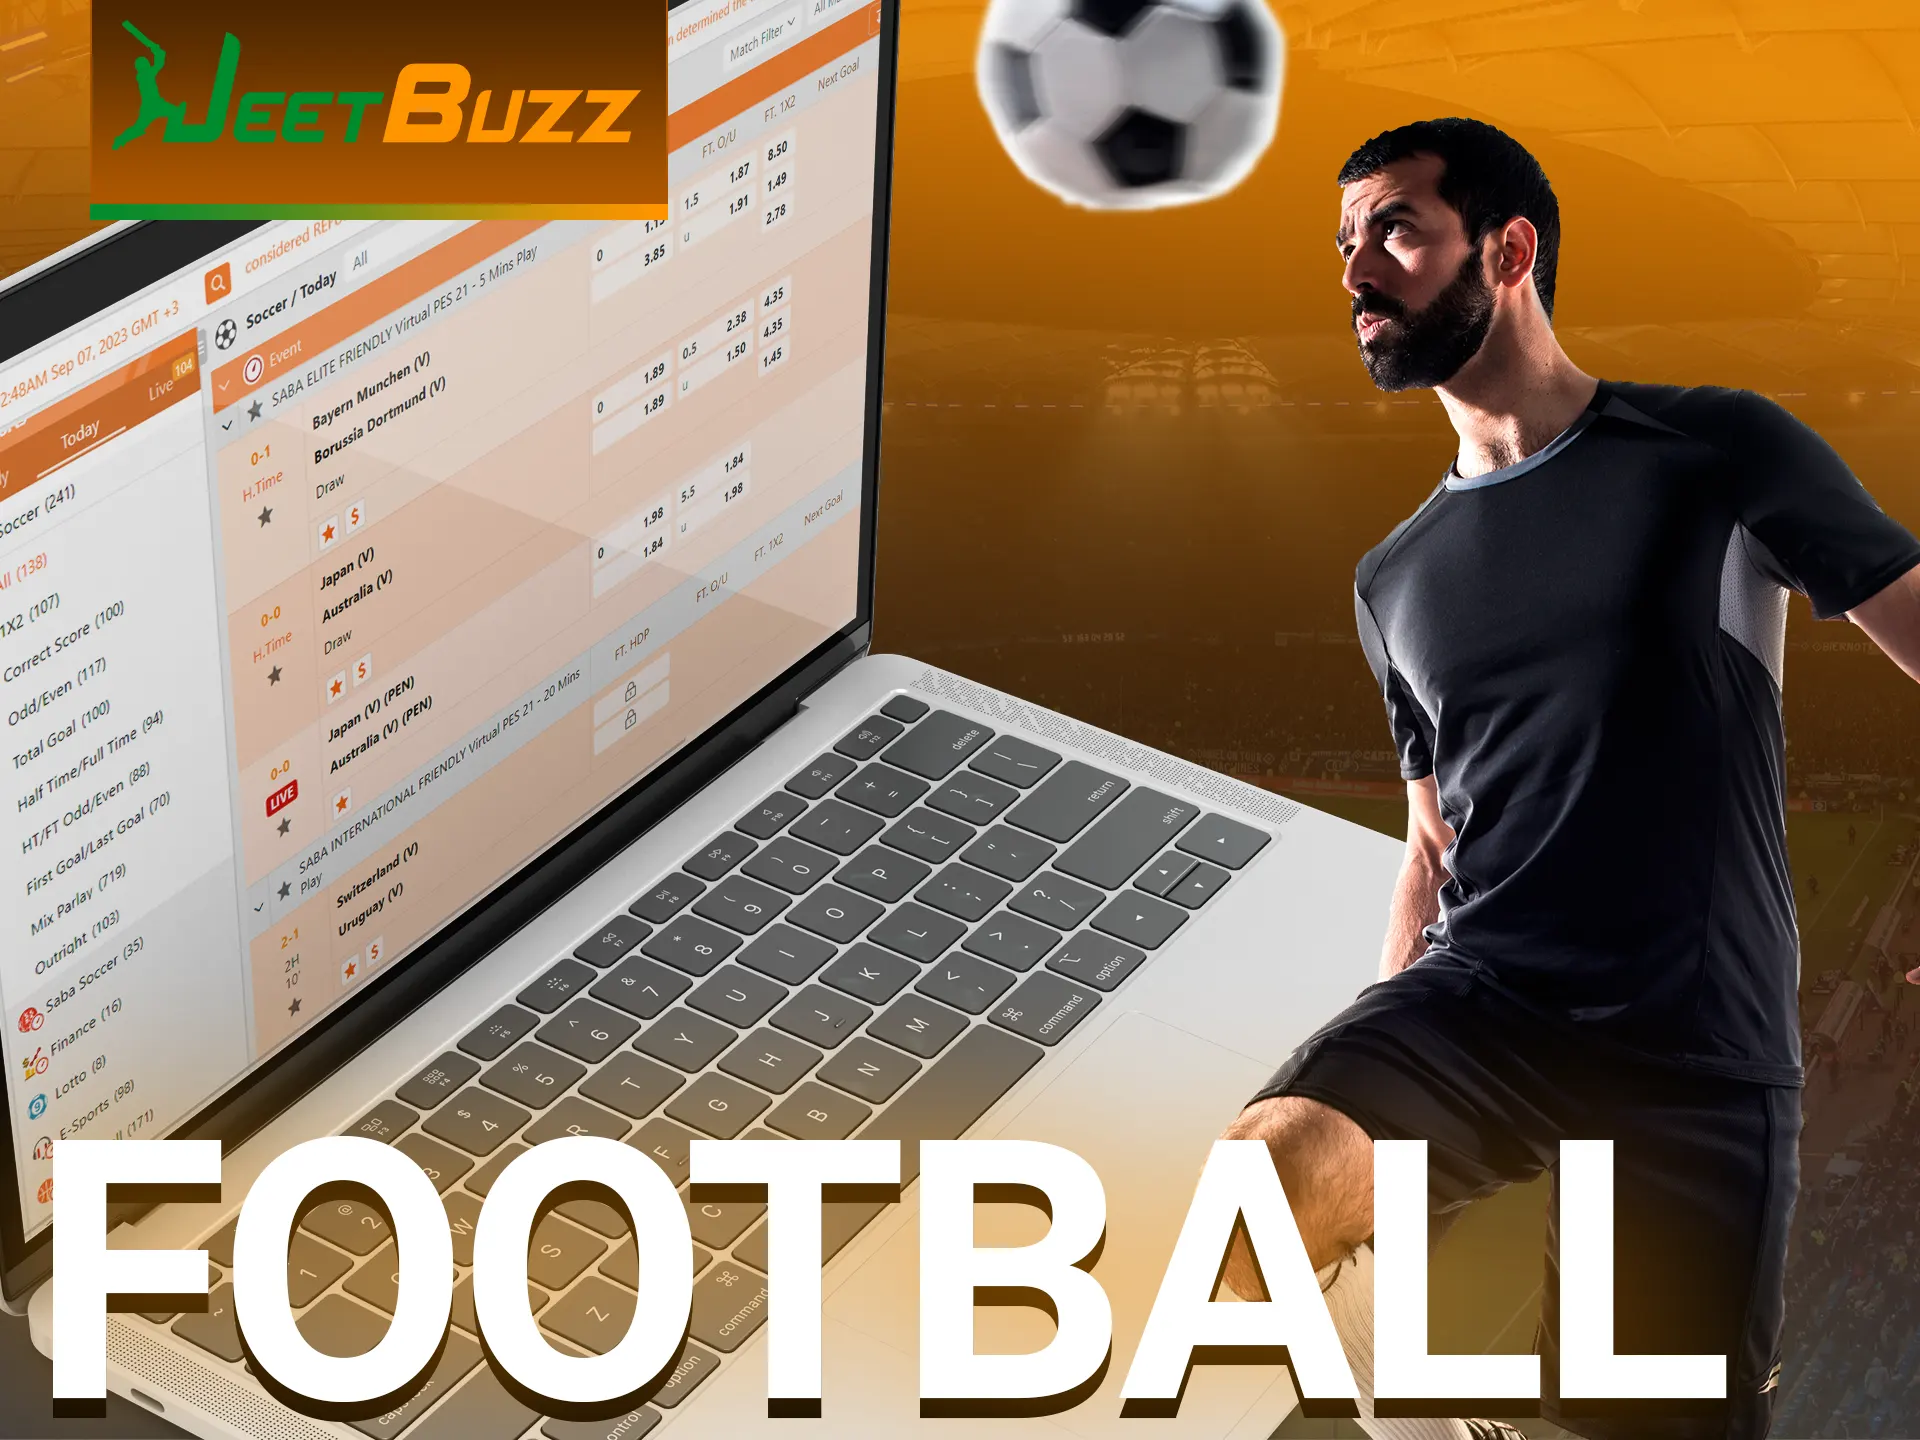 Bet on football with Jeetbuzz.